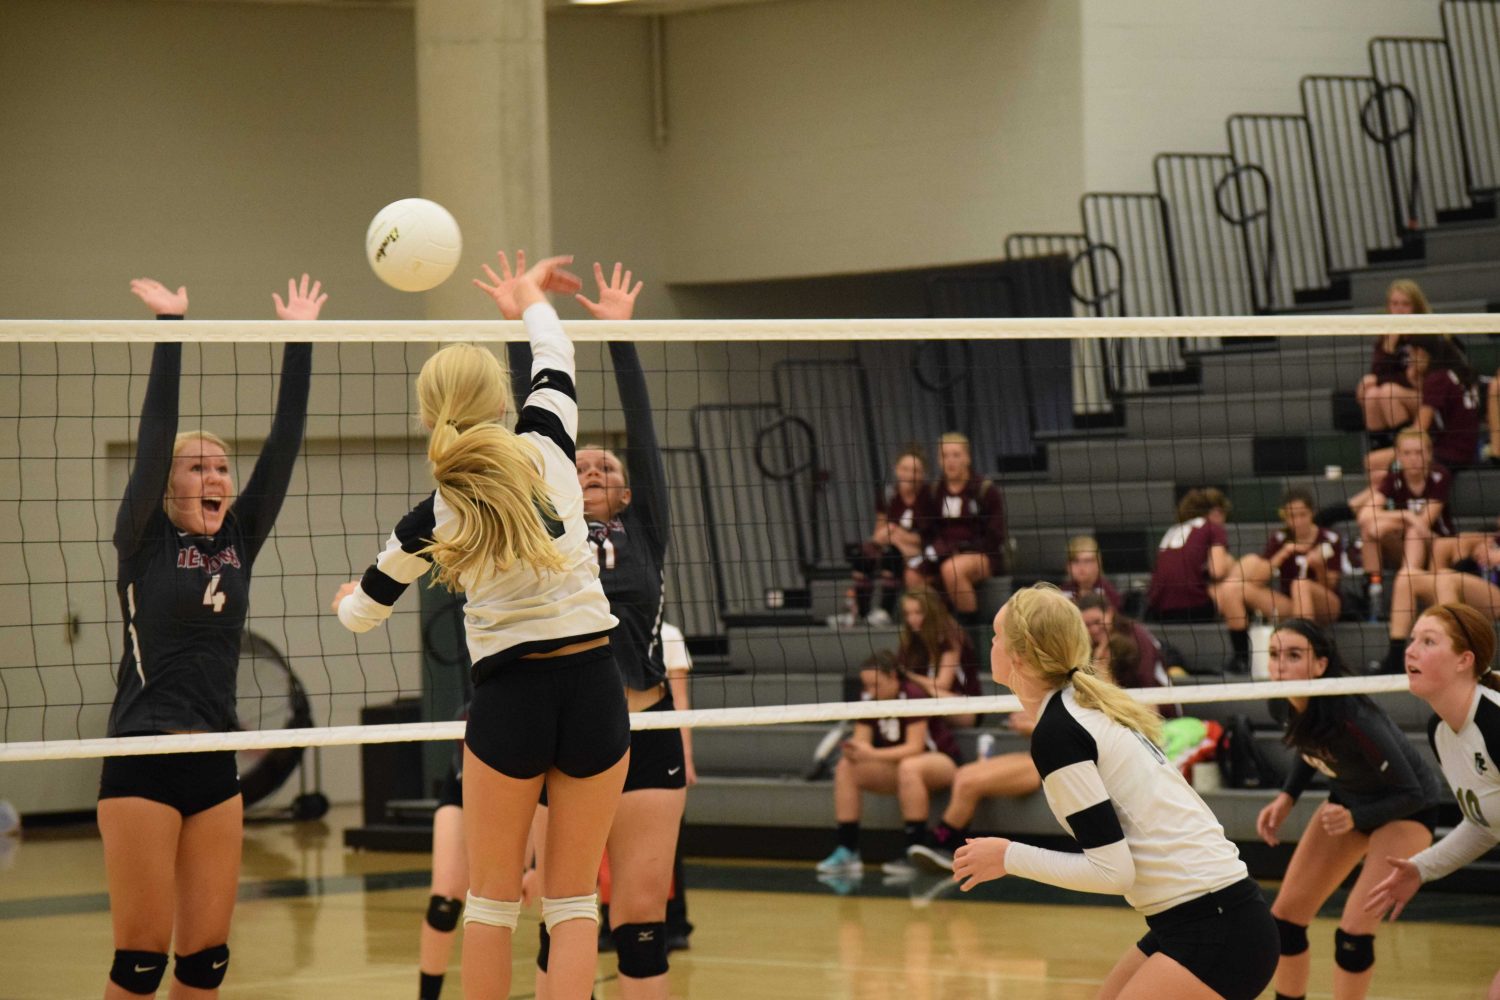 Lindgren with a spike that resulted in a point. Photo Credit: Haley Rockwell